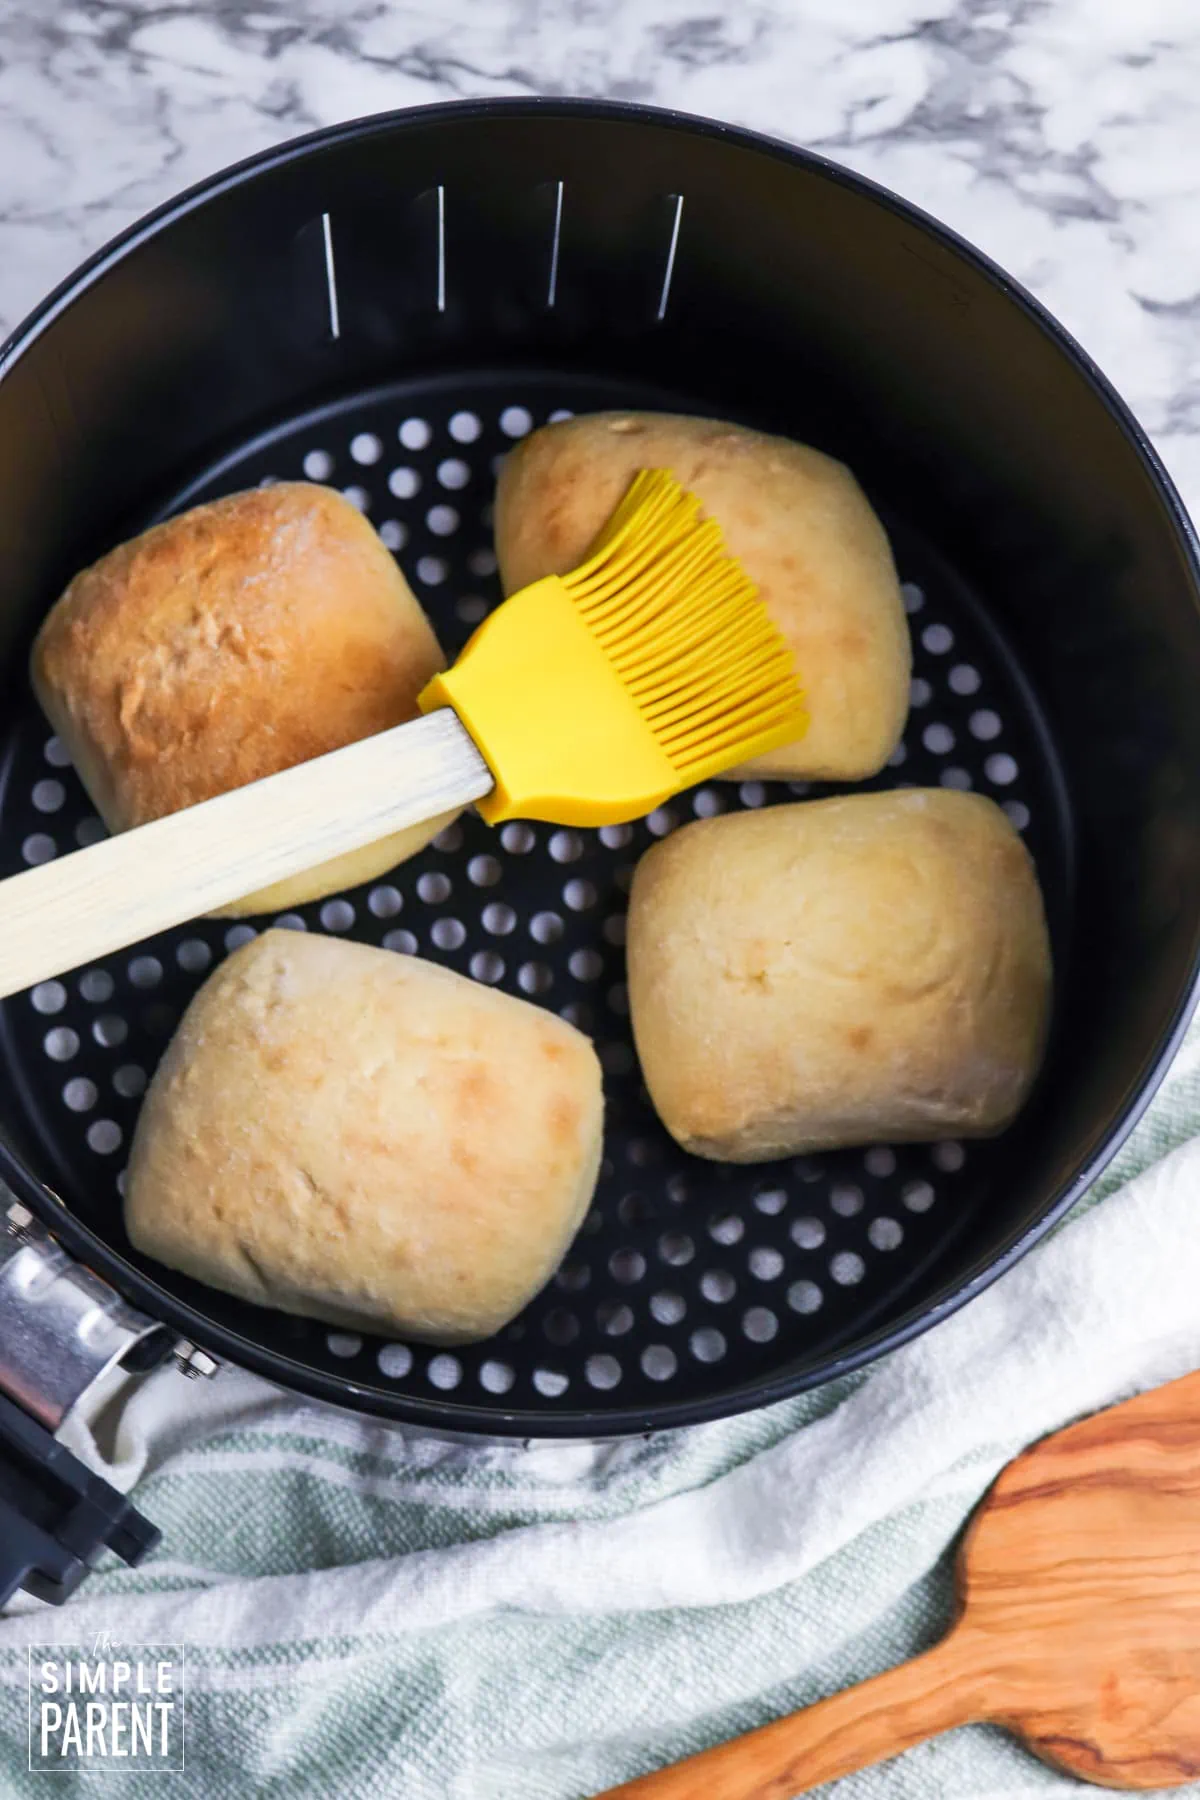 Brushing melted butter on rolls in air fryer basket